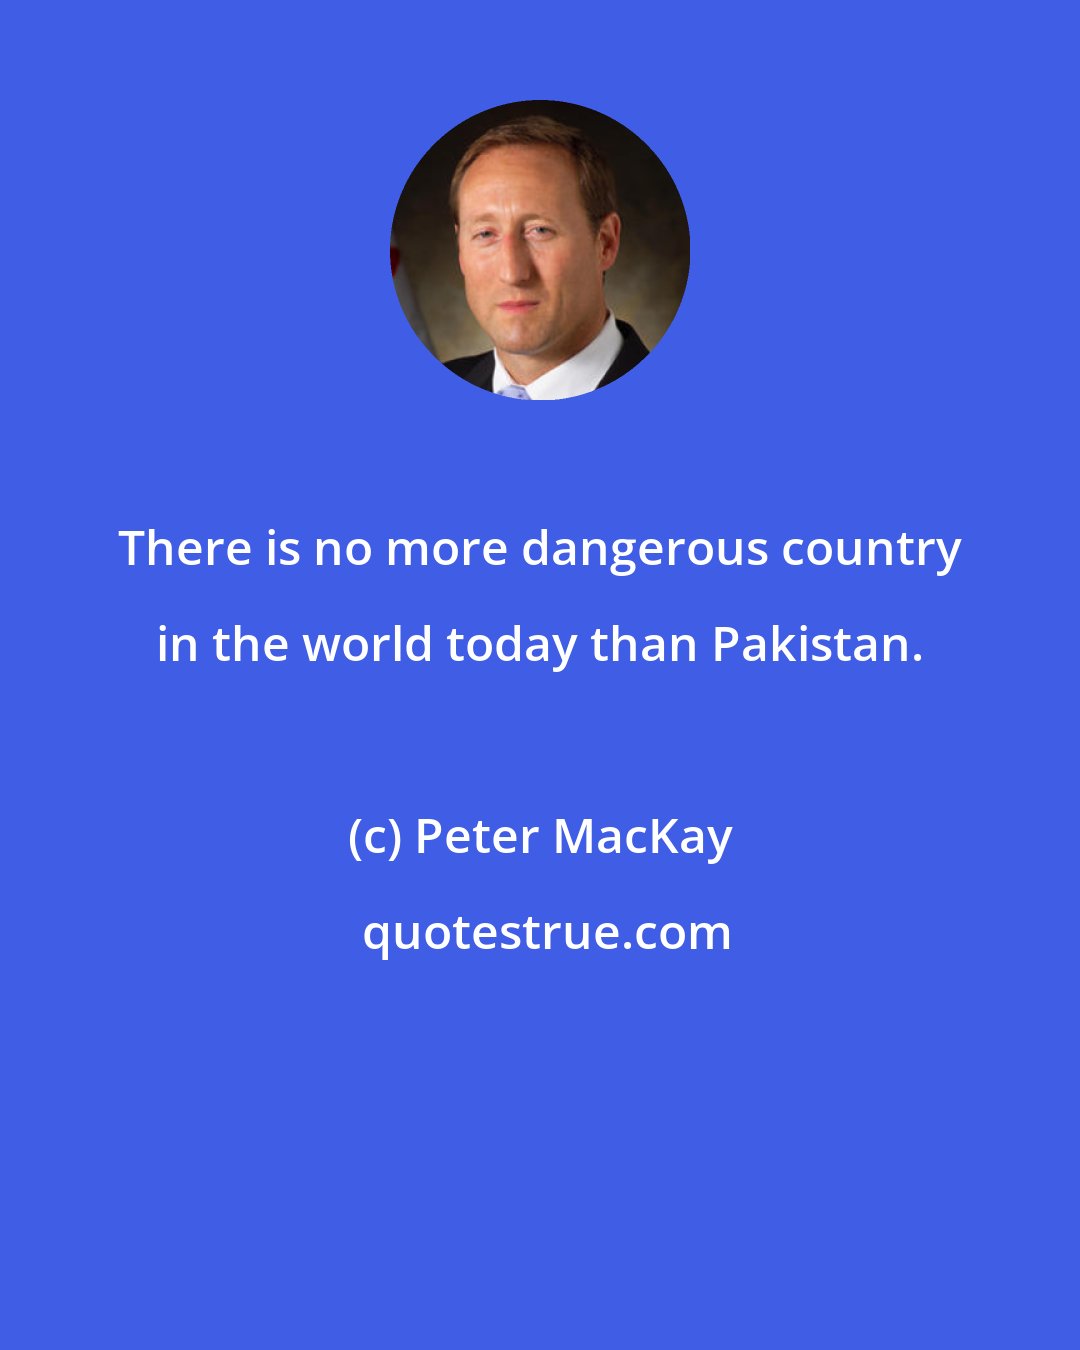 Peter MacKay: There is no more dangerous country in the world today than Pakistan.